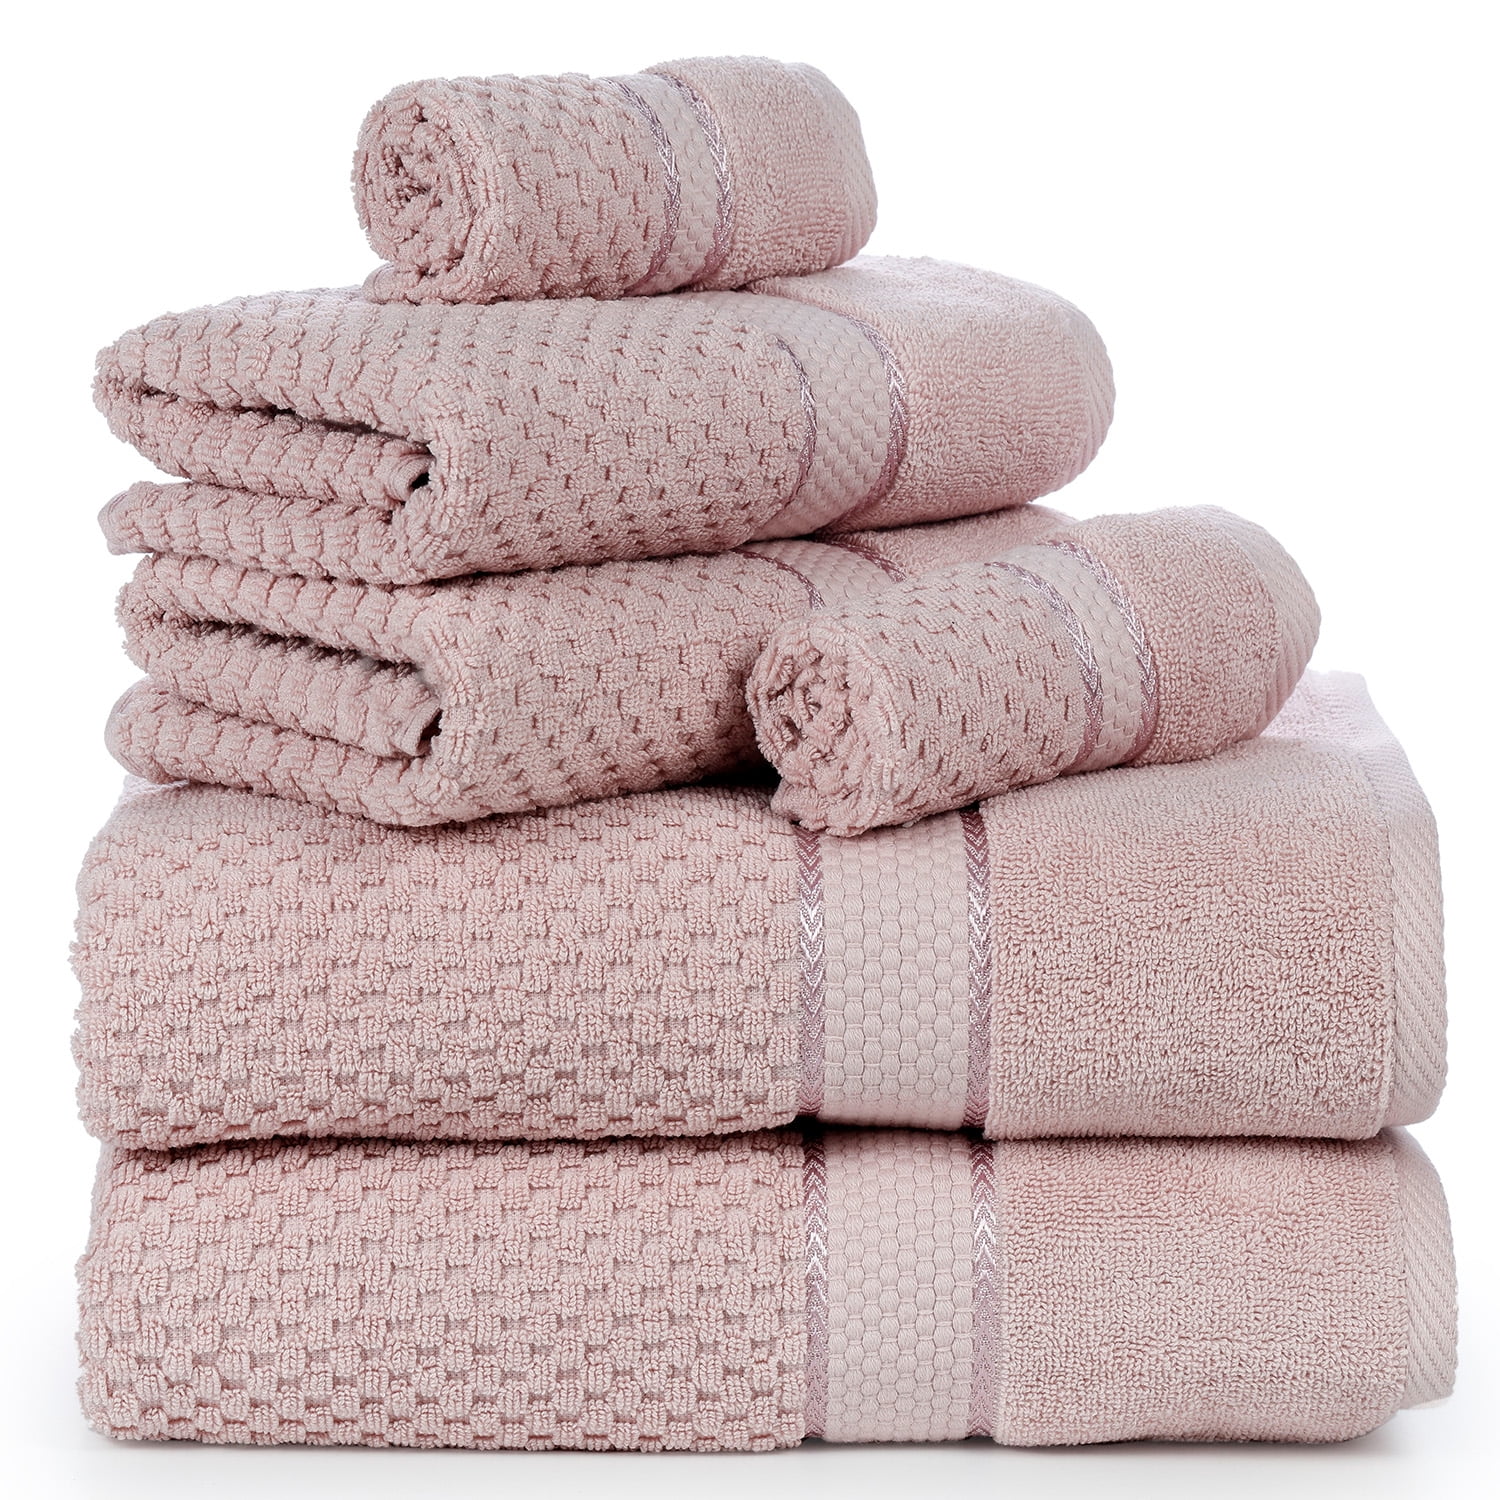 White Classic Luxury Soft Ivory Bath Sheet Towels - 650 GSM Cotton Luxury  Bath Towels Extra Large 35x70 | Highly Absorbent and Quick Dry | Hotel